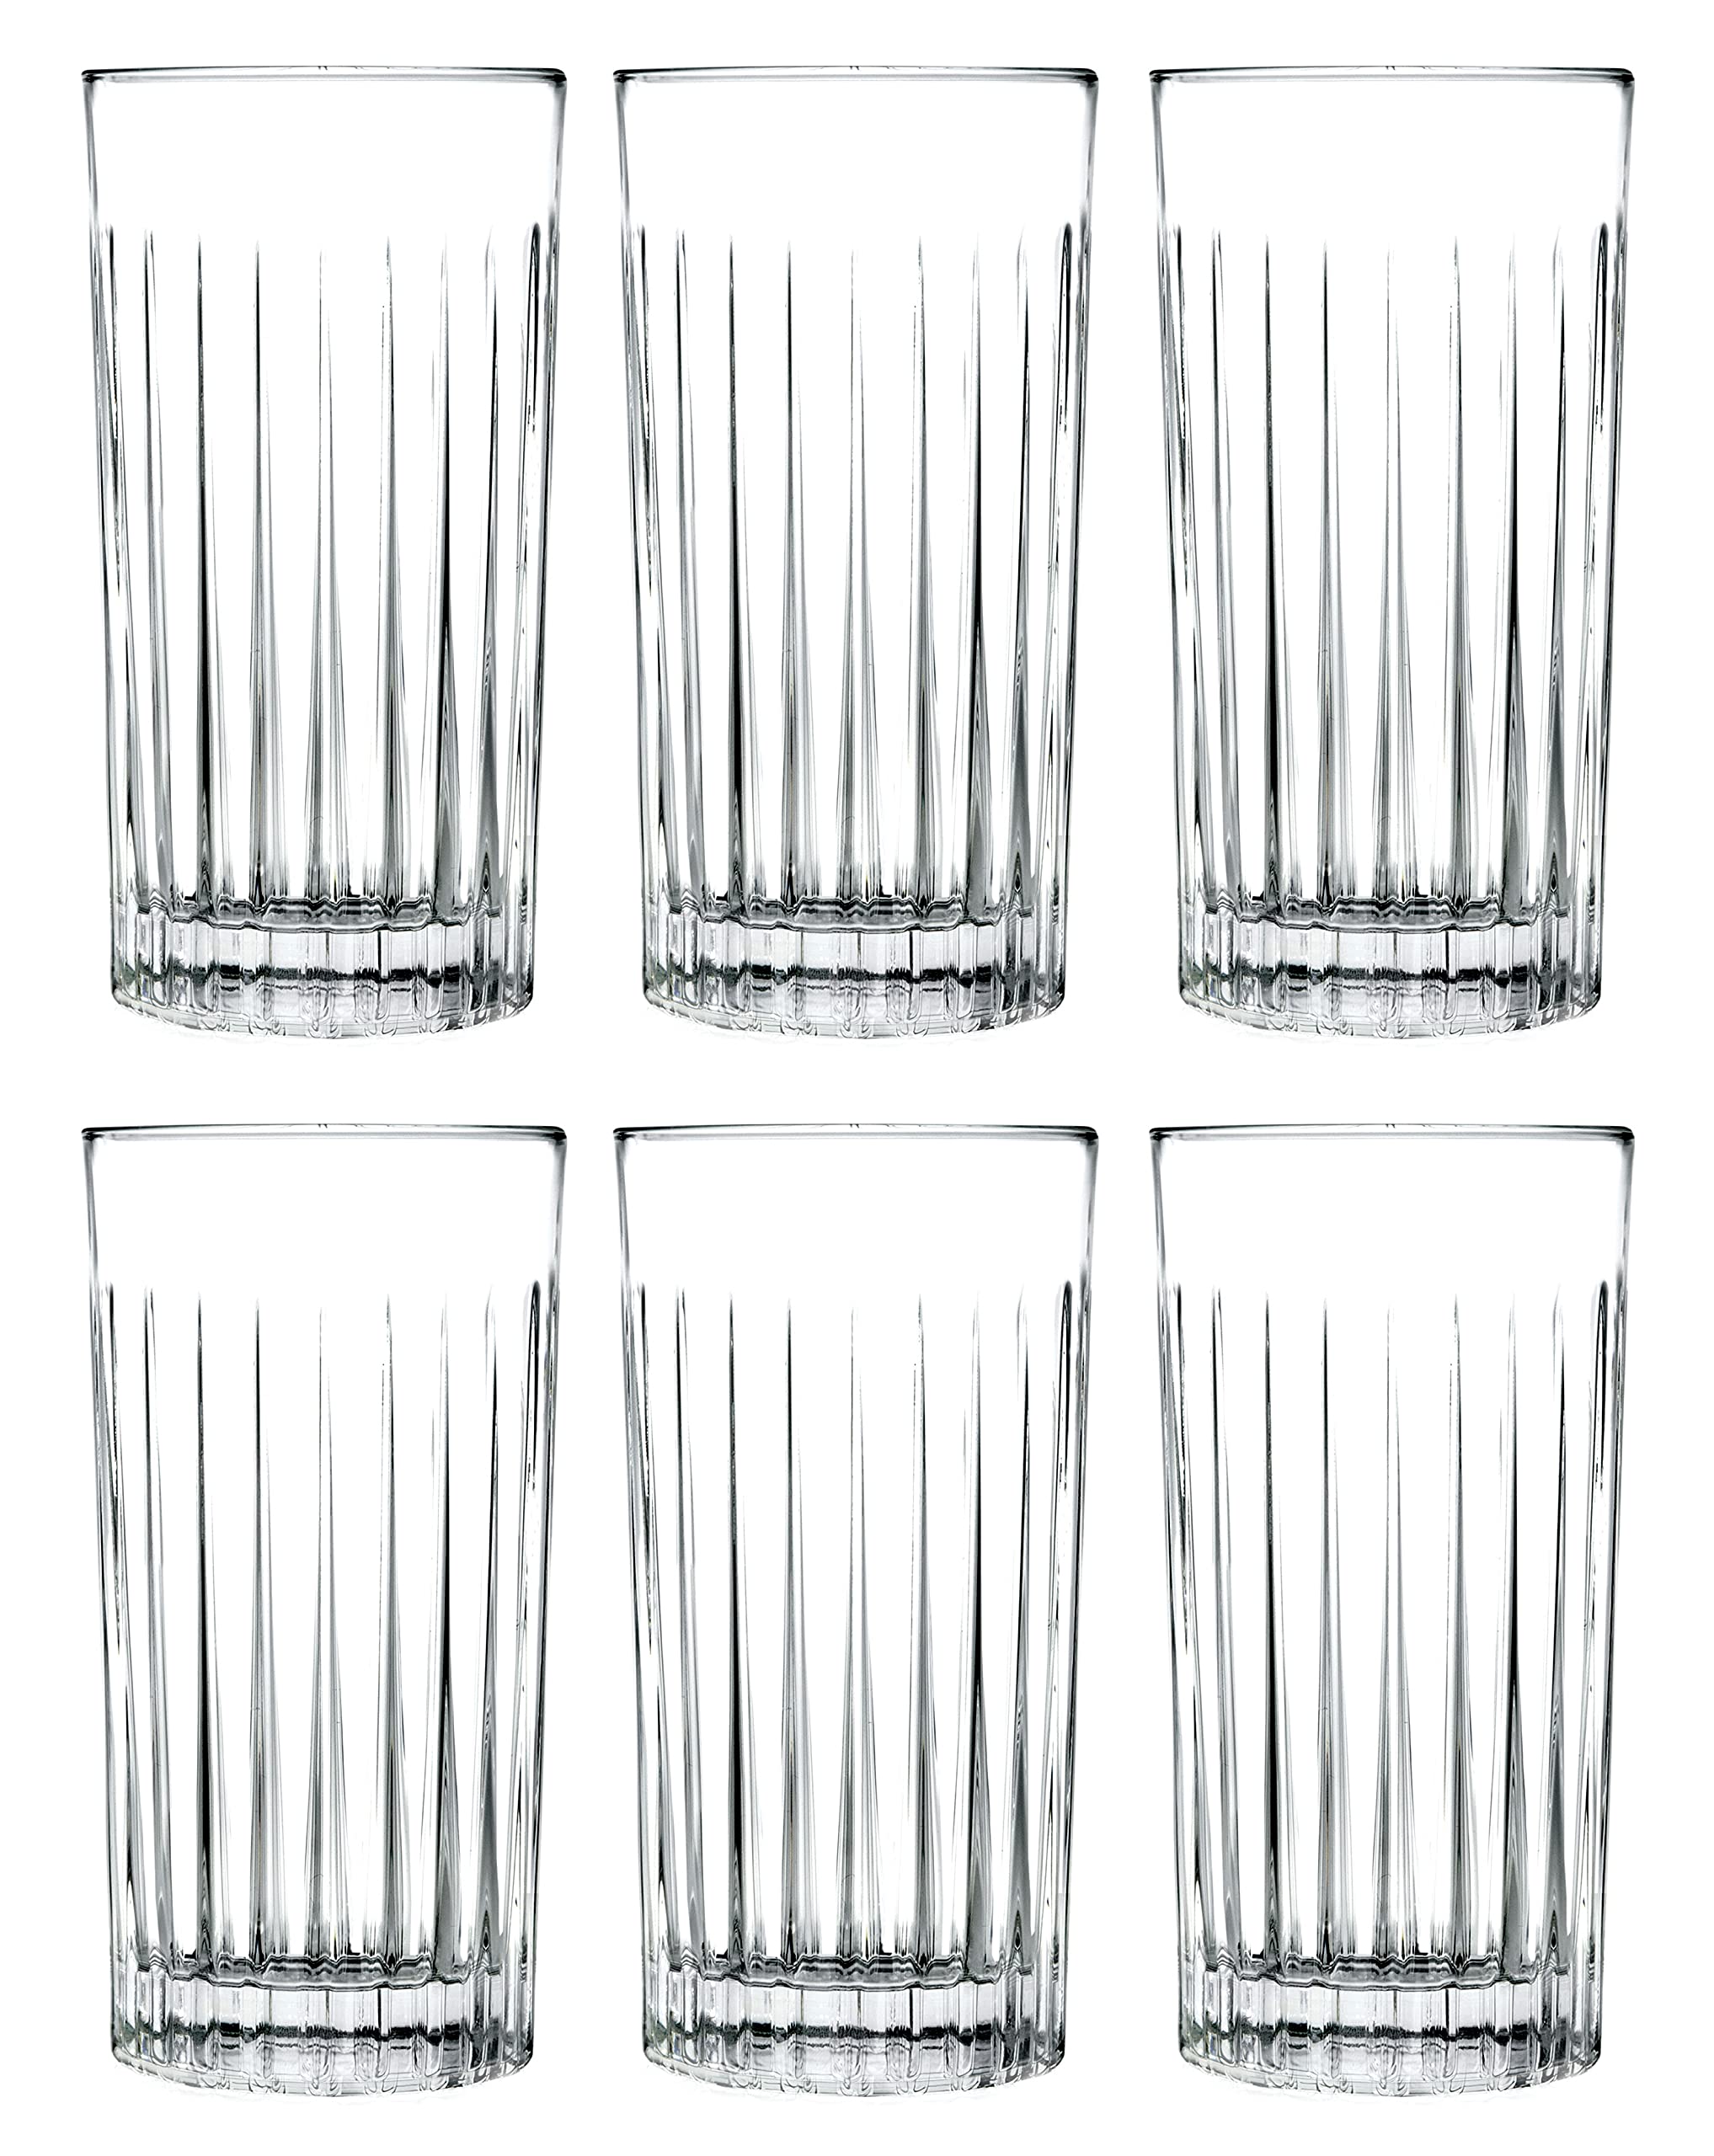 Barski Highball - Glass - Set of 6 - Hiball Glasses - Crystal Glass - Beautifully Designed - Drinking Tumblers - for Water, Juice, Wine, Beer and Cocktails - 15 oz Made in Europe